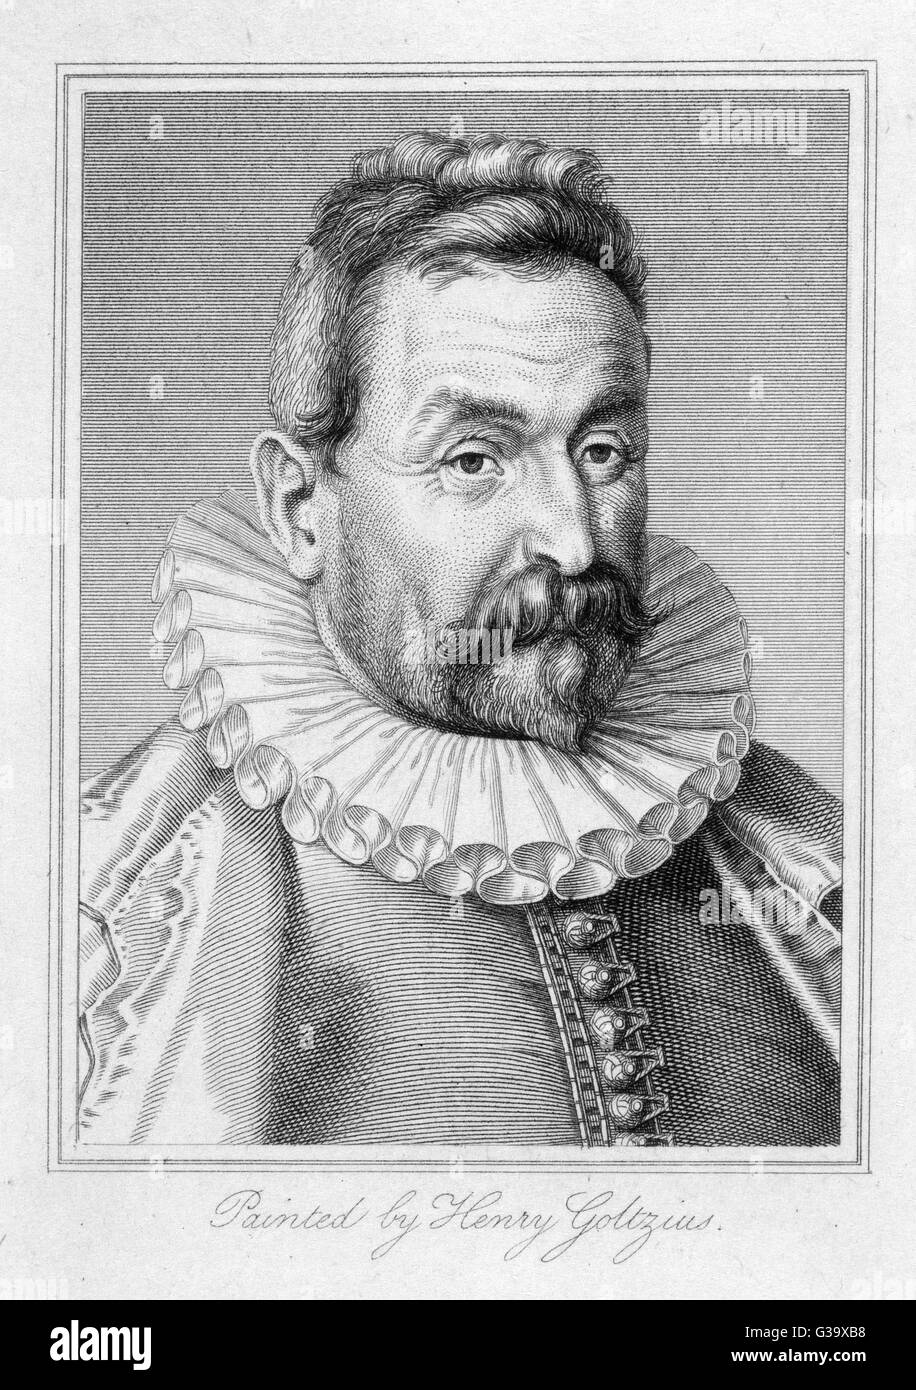 JEAN NICOT French diplomat and scholar who introduced tobacco from Portugal  into France Date: circa 1530 - 1600 Stock Photo - Alamy